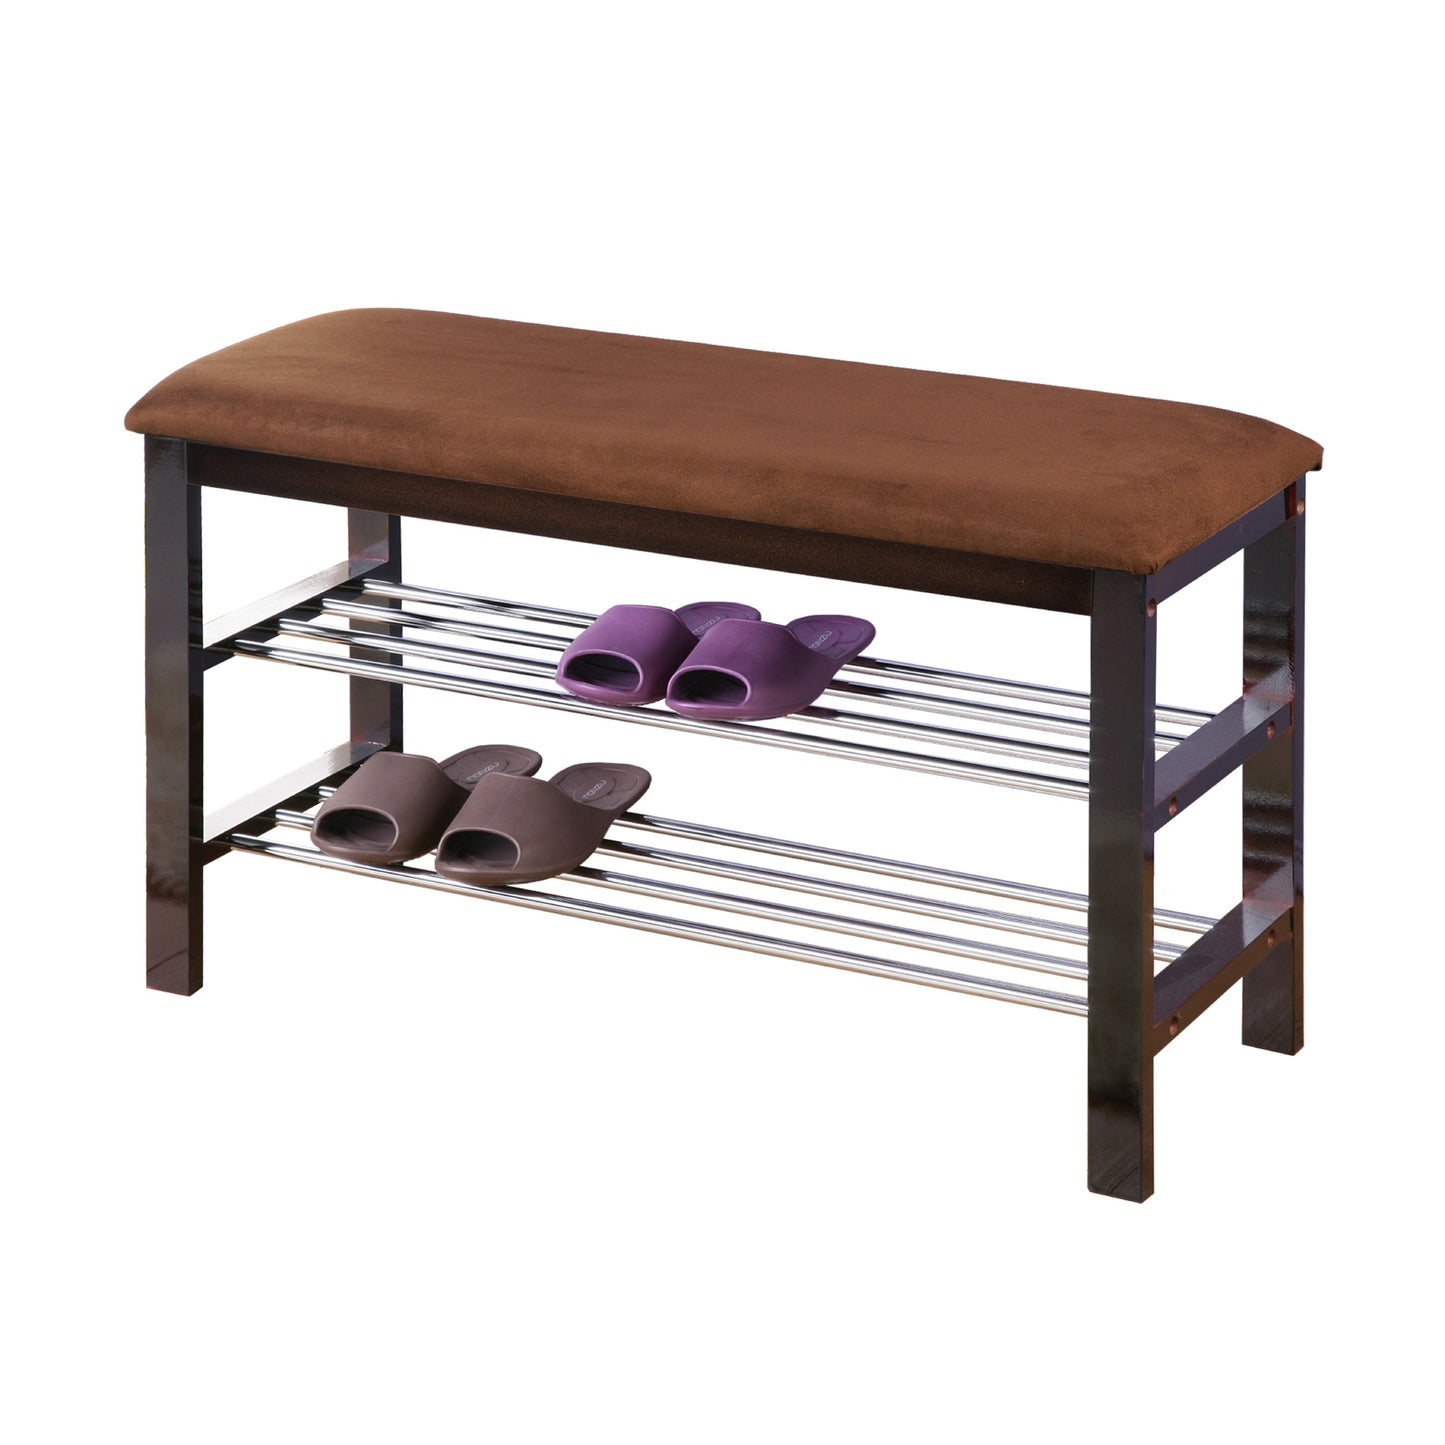 Wood Shoe Bench with Chocolate Microfiber Seat, Espresso